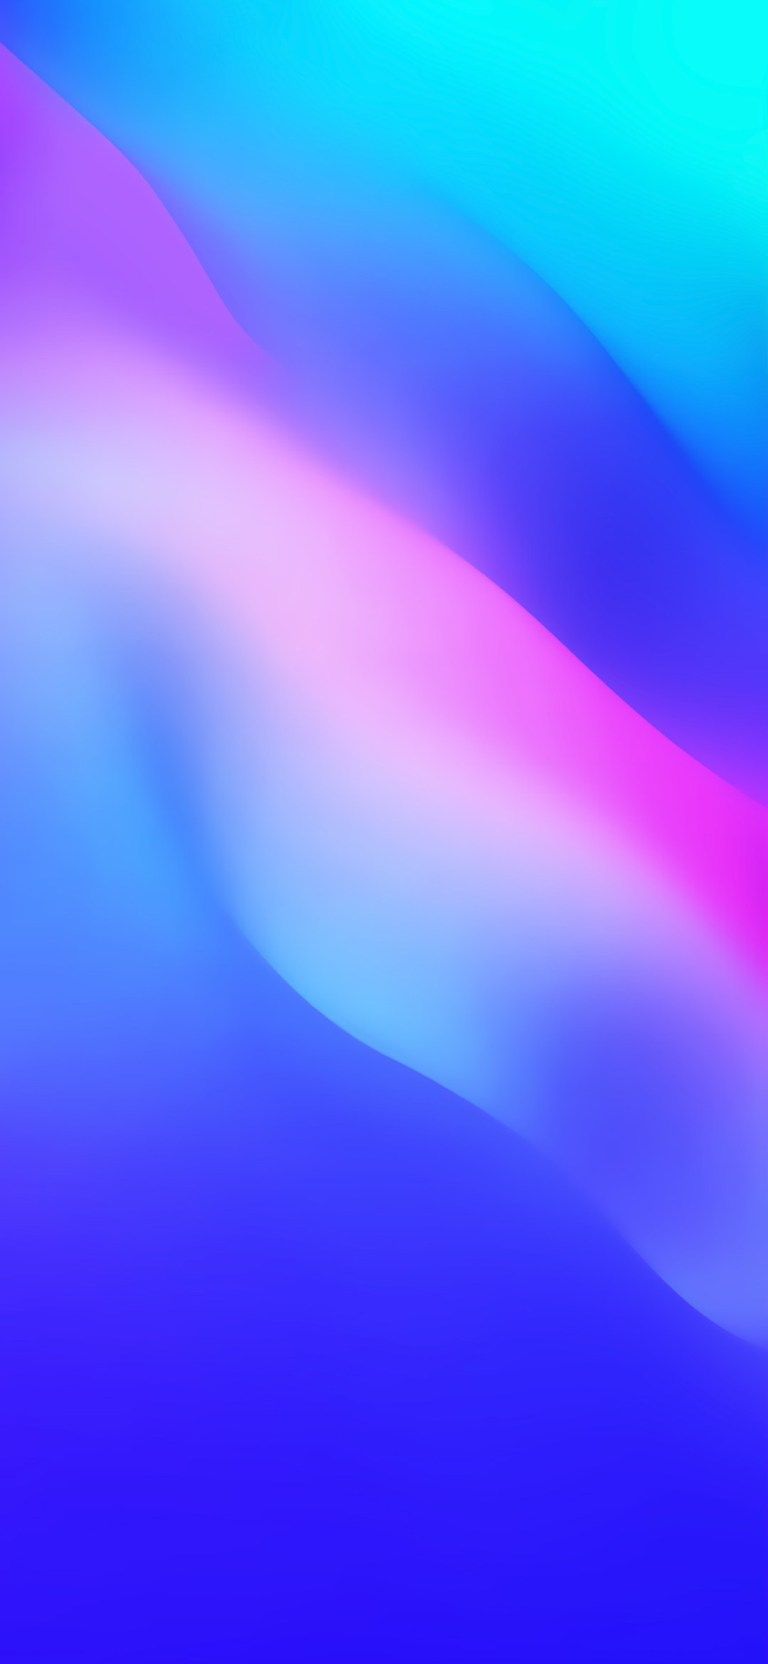 Best 10 Wallpaper for Huawei Honor 10 Lite Blue Wallpaper. Wallpaper Download. High Resolution Wallpaper. Huawei wallpaper, Stock wallpaper, Abstract wallpaper background